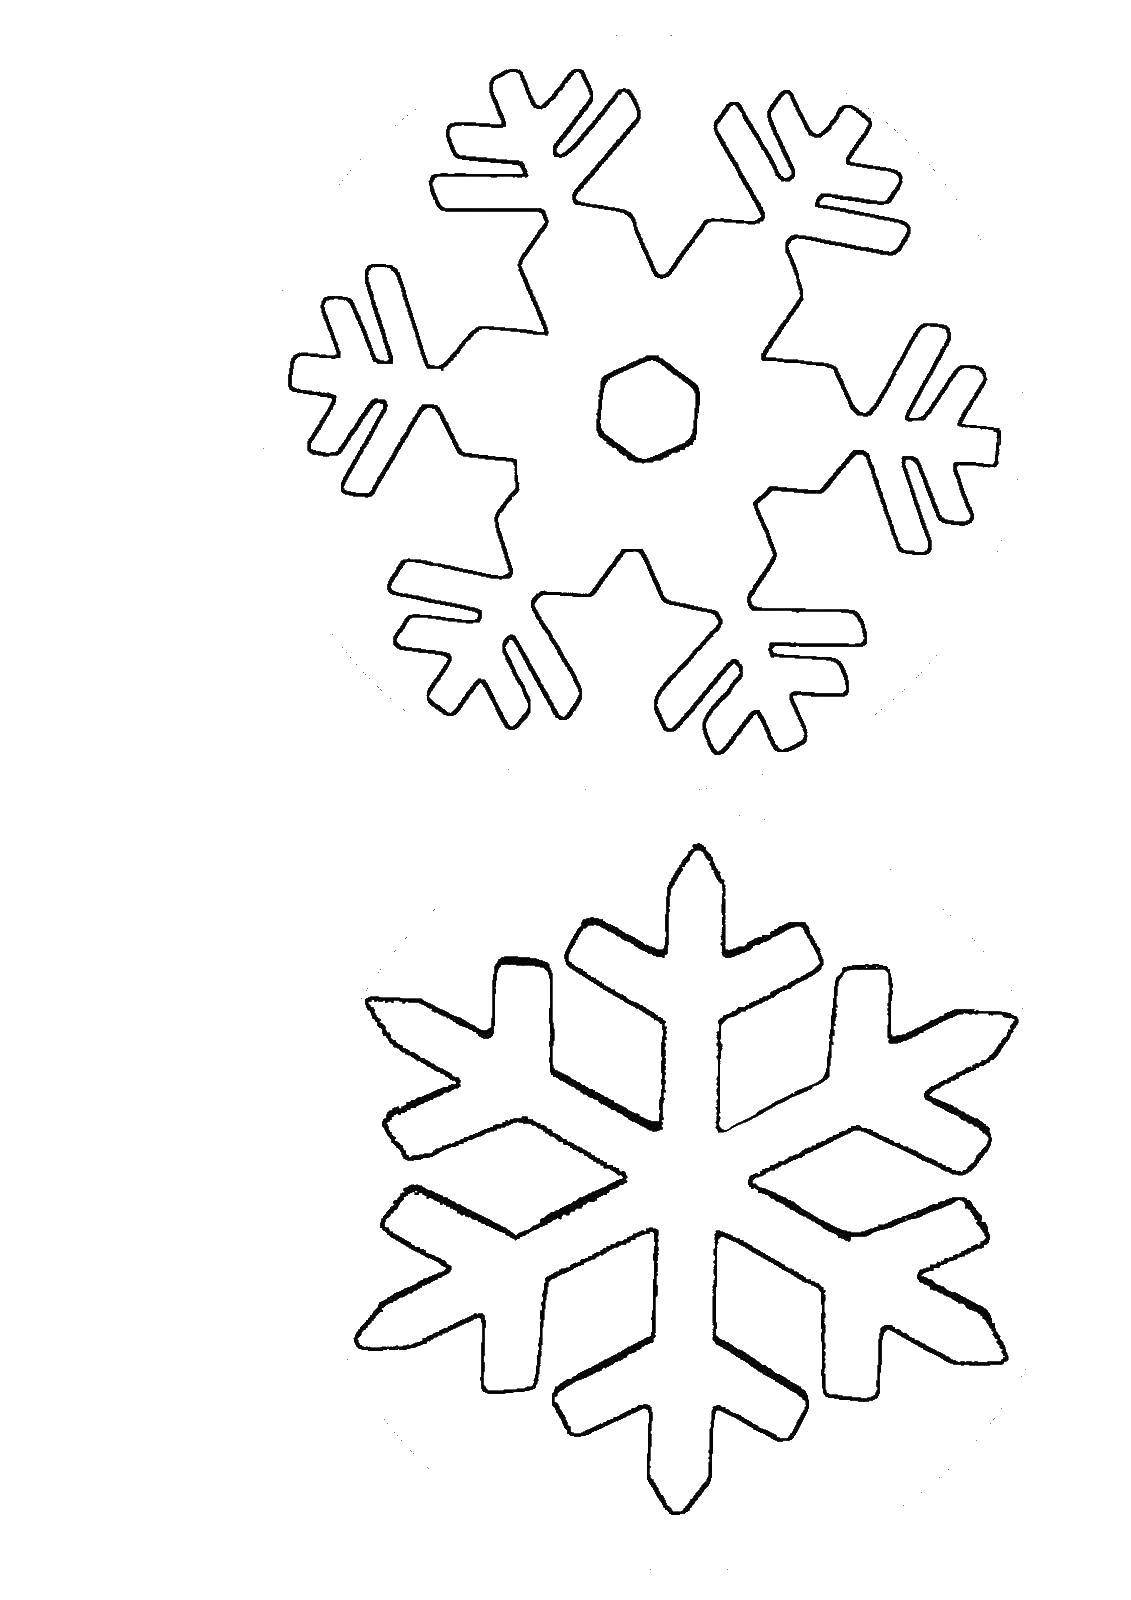 Coloring The contours of the snowflakes. Category The contour snowflakes. Tags:  outlines, snowflakes, patterns.